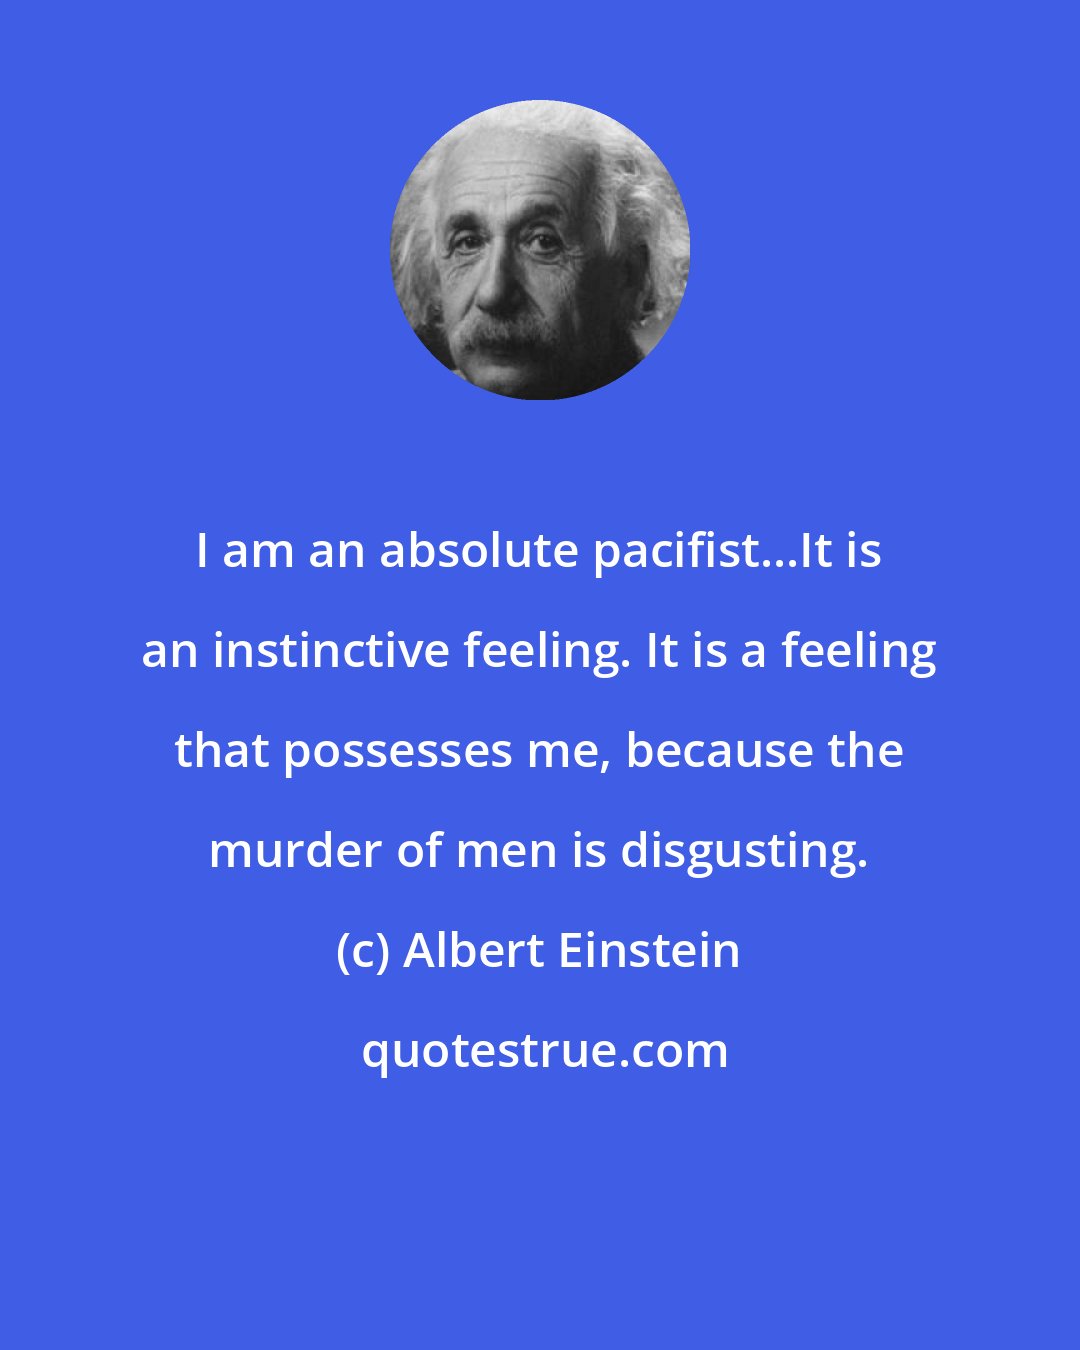 Albert Einstein: I am an absolute pacifist...It is an instinctive feeling. It is a feeling that possesses me, because the murder of men is disgusting.